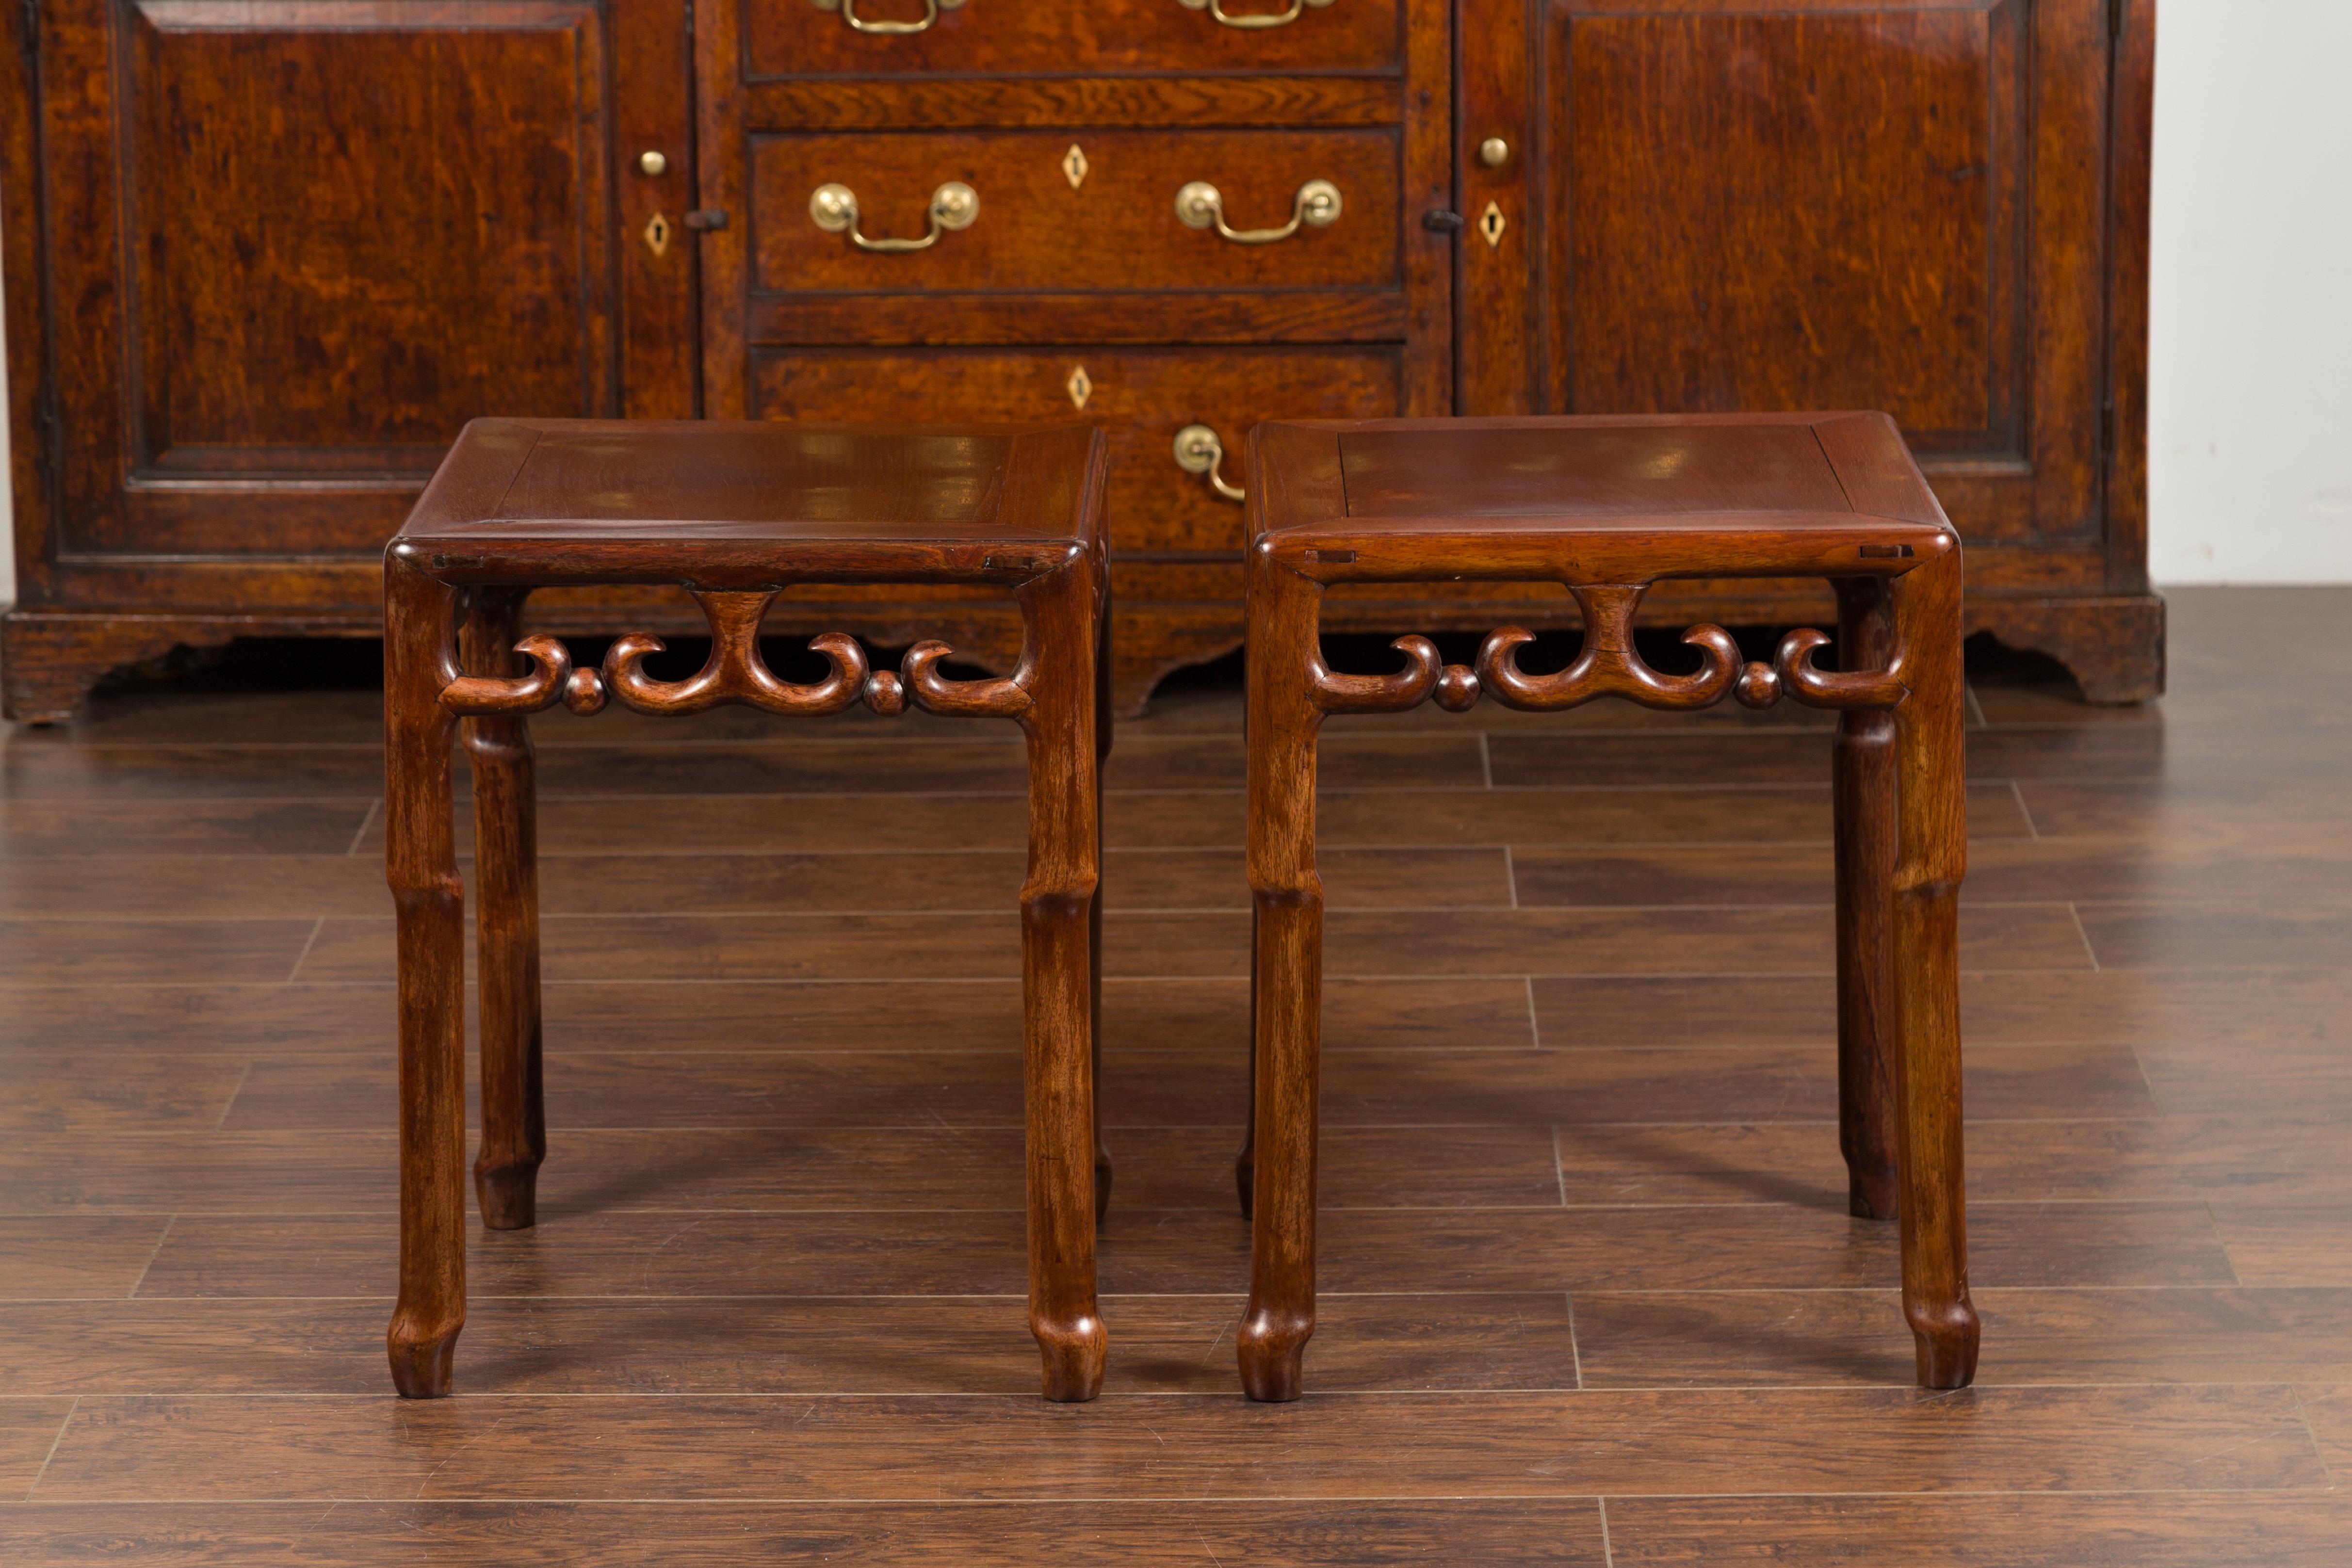 Pair of Asian Midcentury Mahogany Side Tables with Scrolling Fretwork Motifs For Sale 4